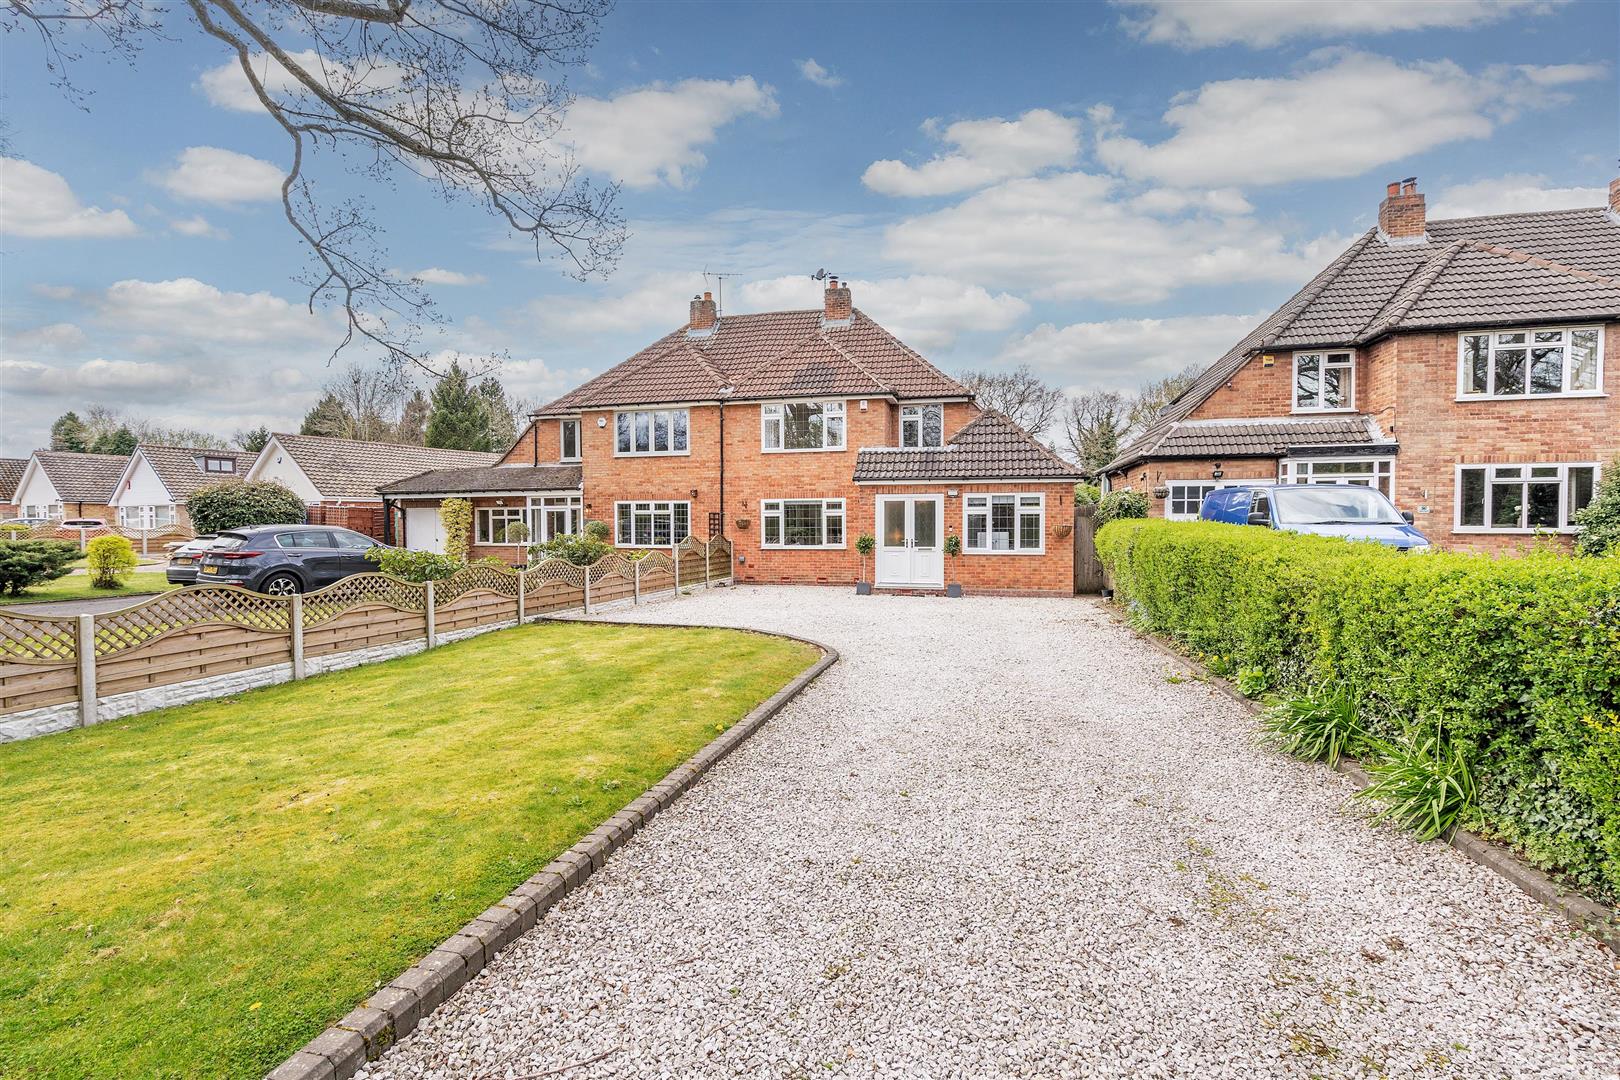 3 bed  for sale in Fulford Hall Road, Solihull, B90 